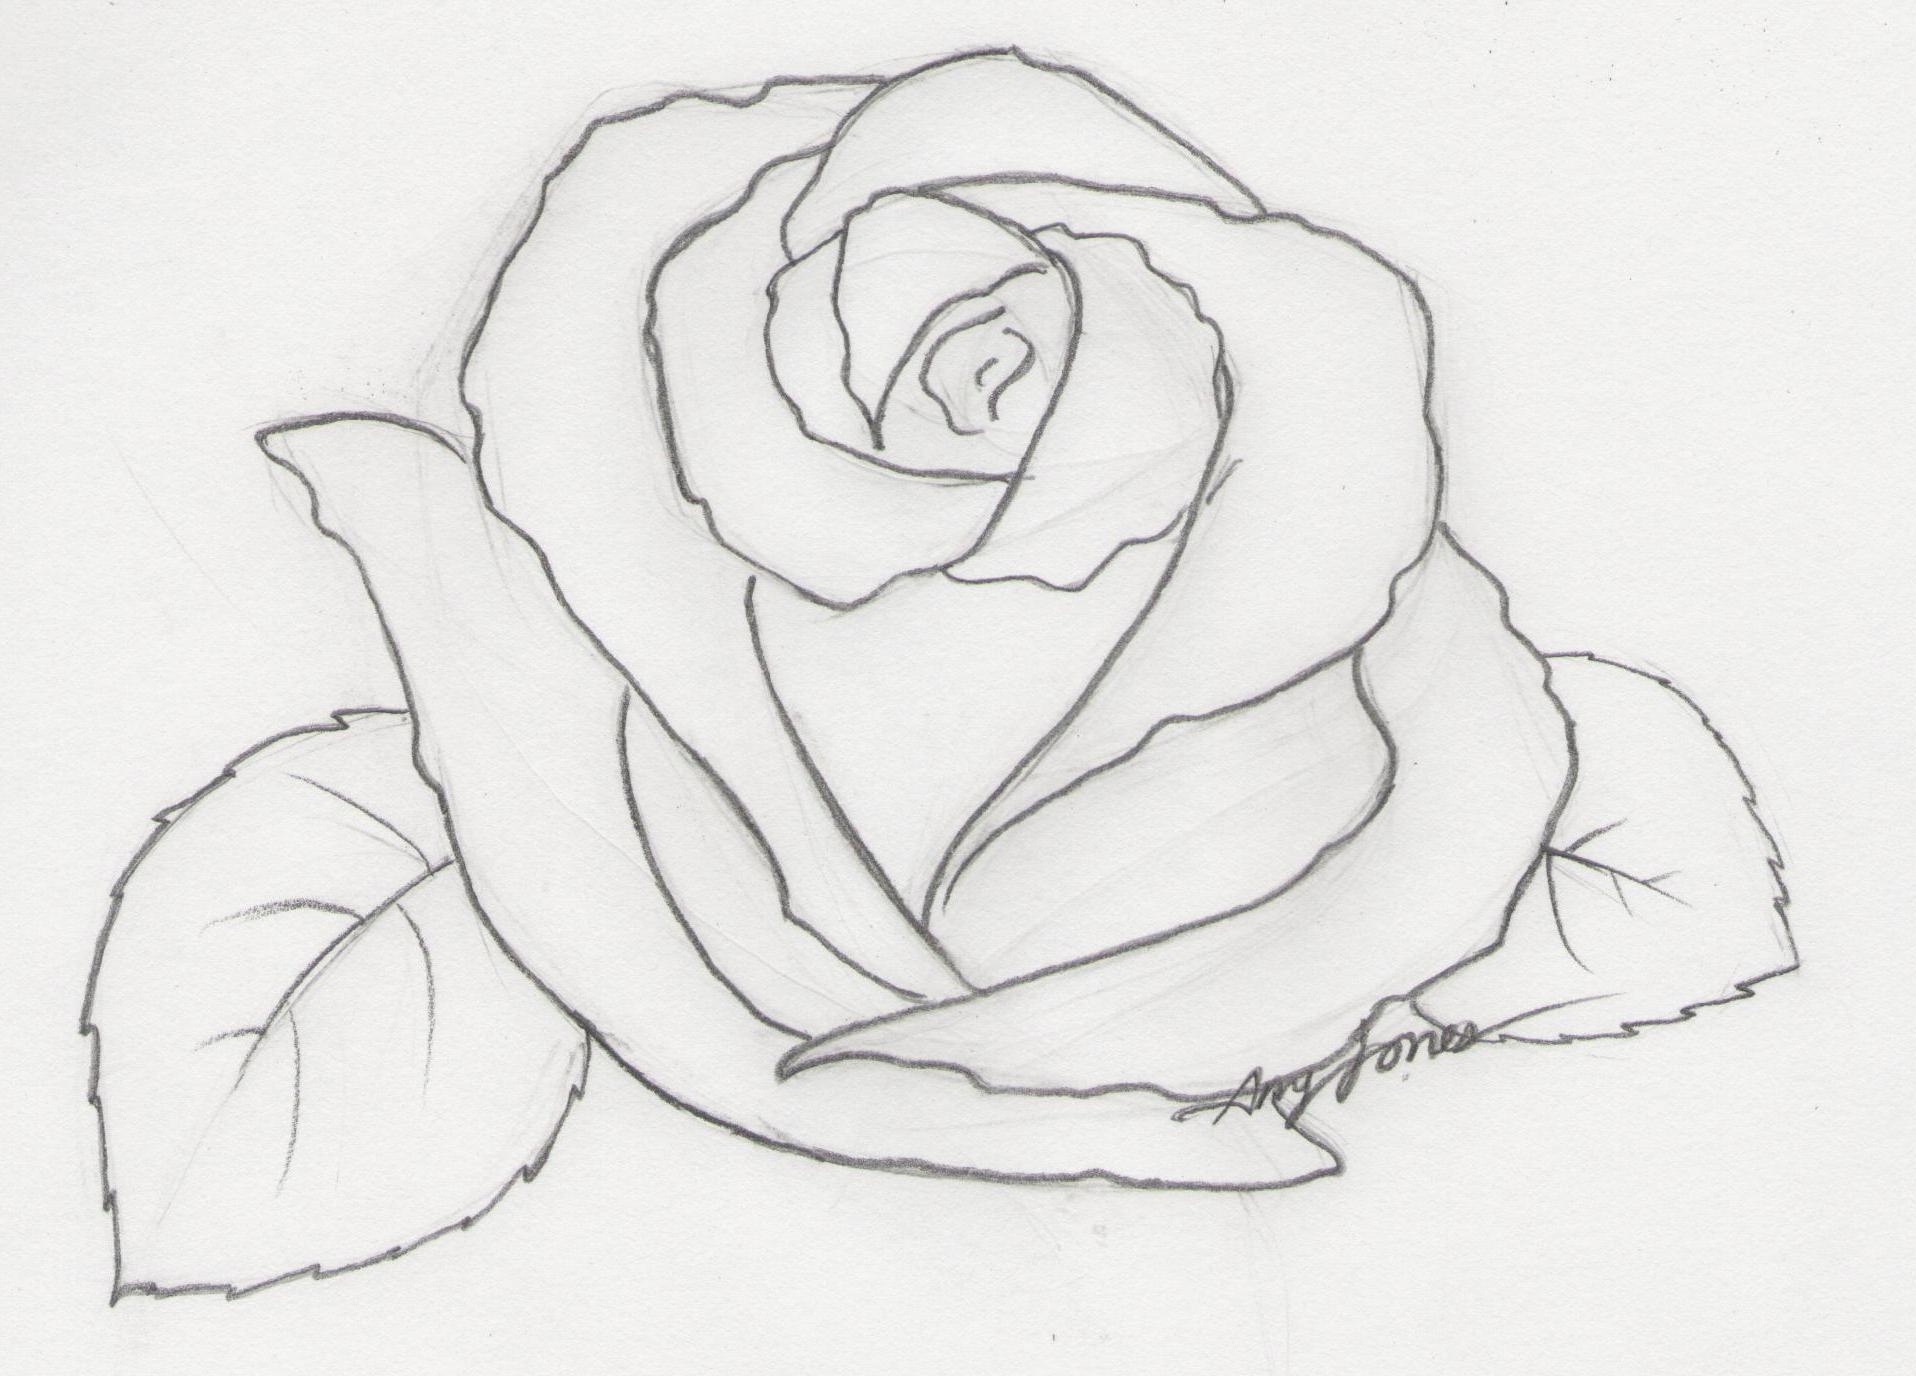 Pencil Drawings Of Flowers Step By Step At Paintingvalley Com Explore Collection Of Pencil Drawings Of Flowers Step By Step Start by drawing a tiny circle and then add three petals around. pencil drawings of flowers step by step